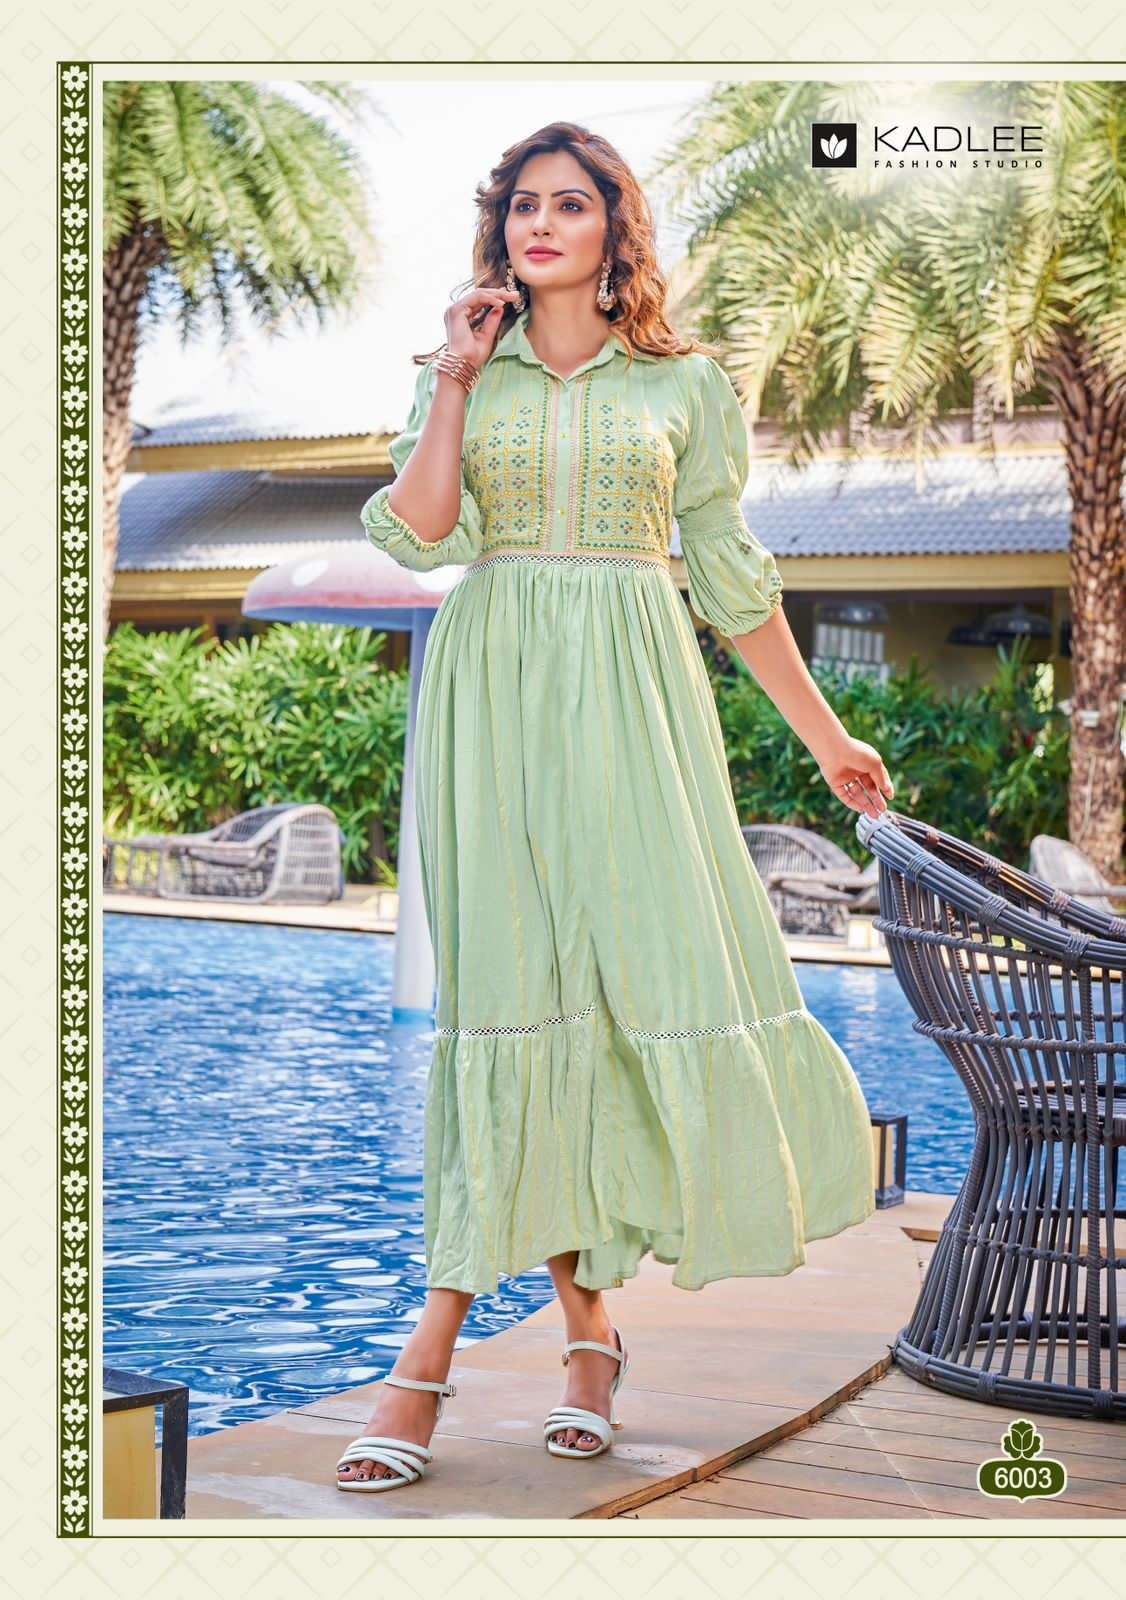 JENNIFER BY KADLEE 6001 TO 6004 SERIES BEAUTIFUL STYLISH FANCY COLORFUL CASUAL WEAR & ETHNIC WEAR VISCOSE RAYON GOWNS AT WHOLESALE PRICE